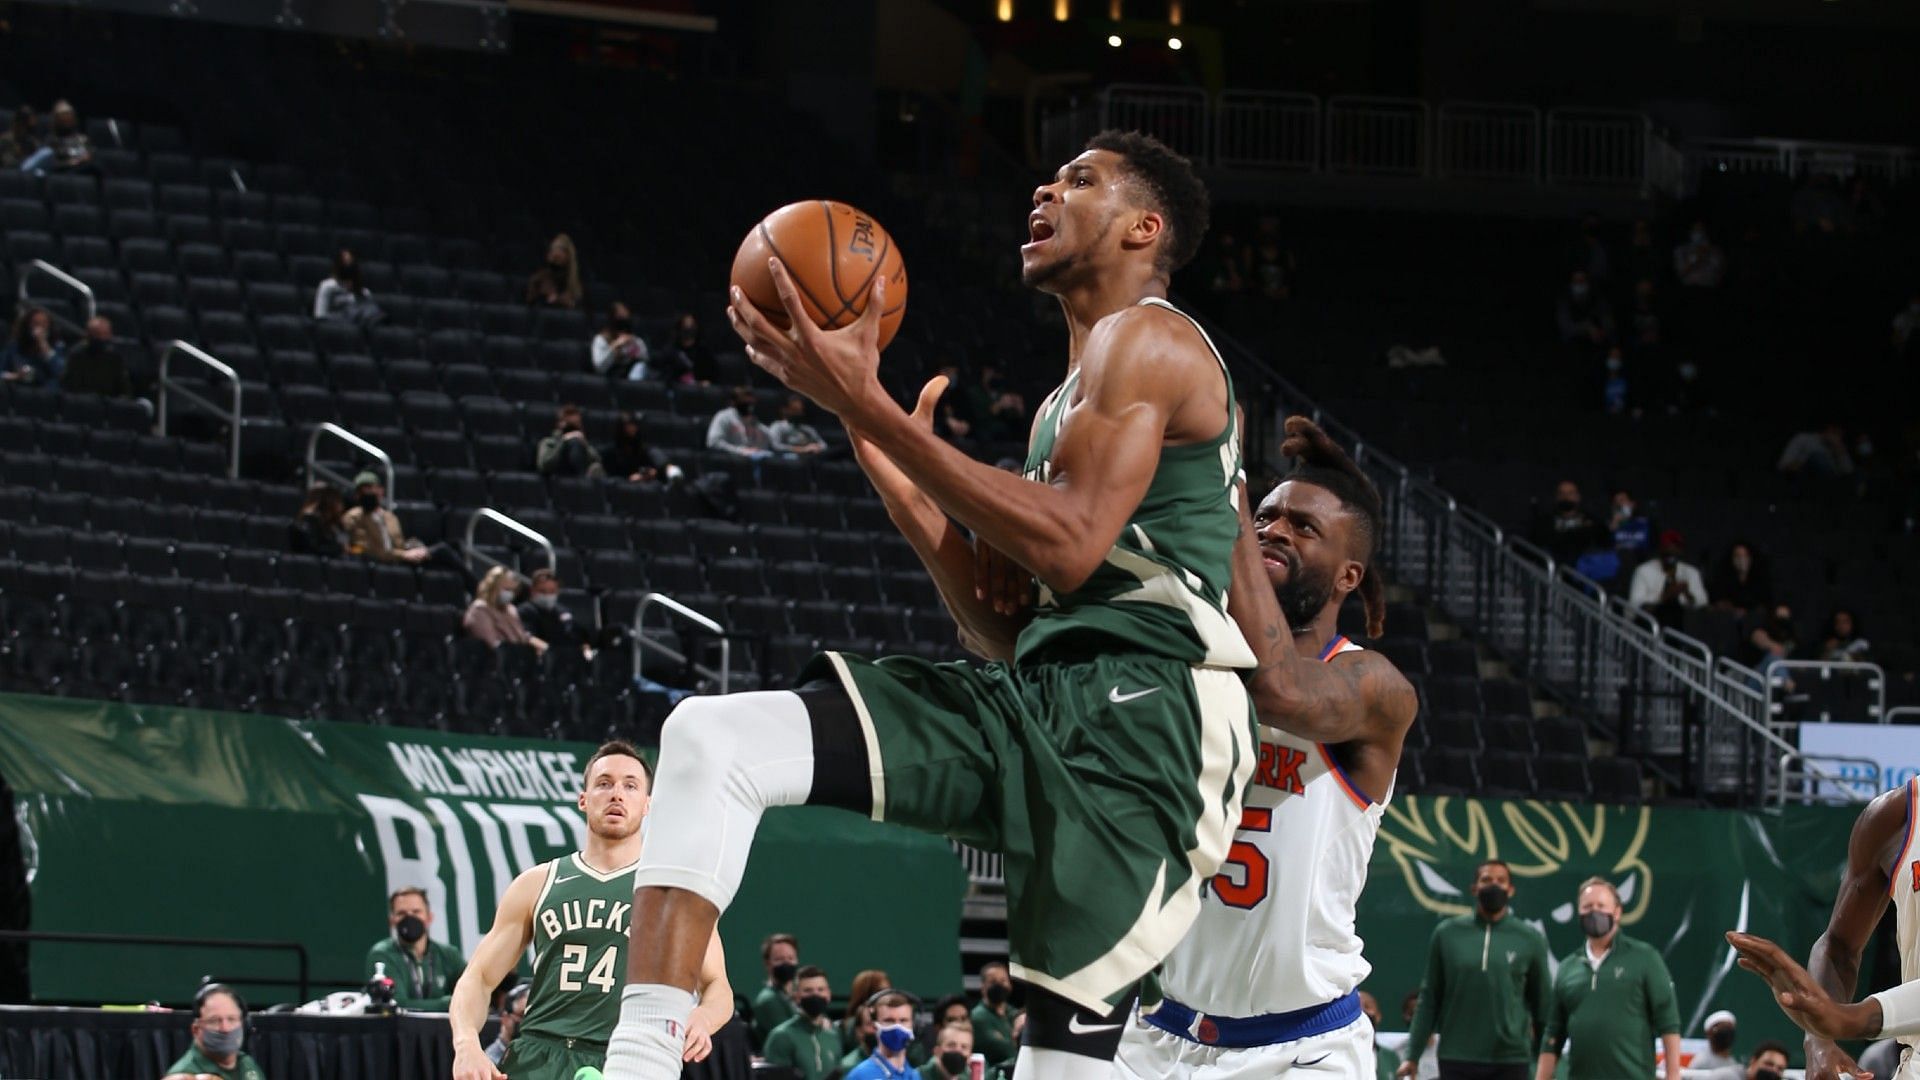 The host and defending champion Milwaukee Bucks are looking to clinch the season series 3-1 against the New York Knicks on Friday. [Photo: NBA.com]